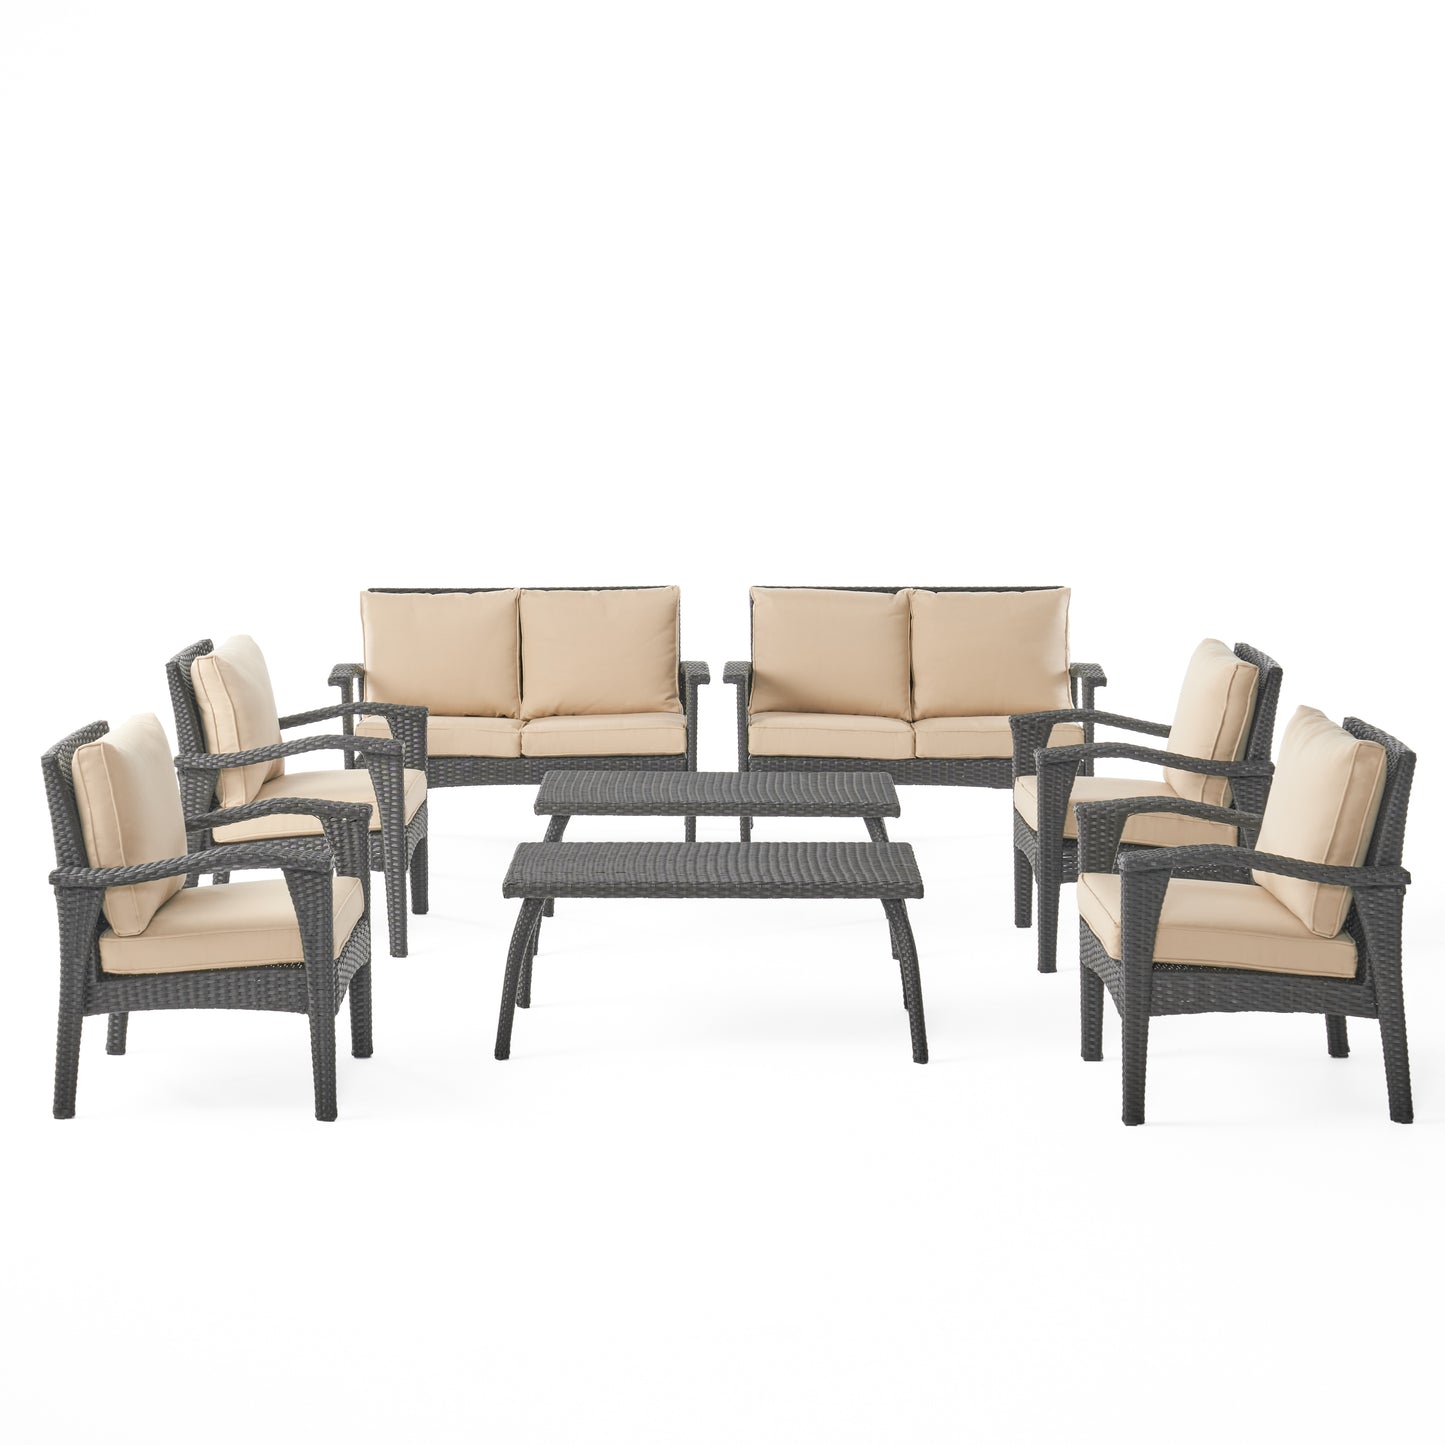 Voyage Outdoor 8pc Brown Wicker Seating Set